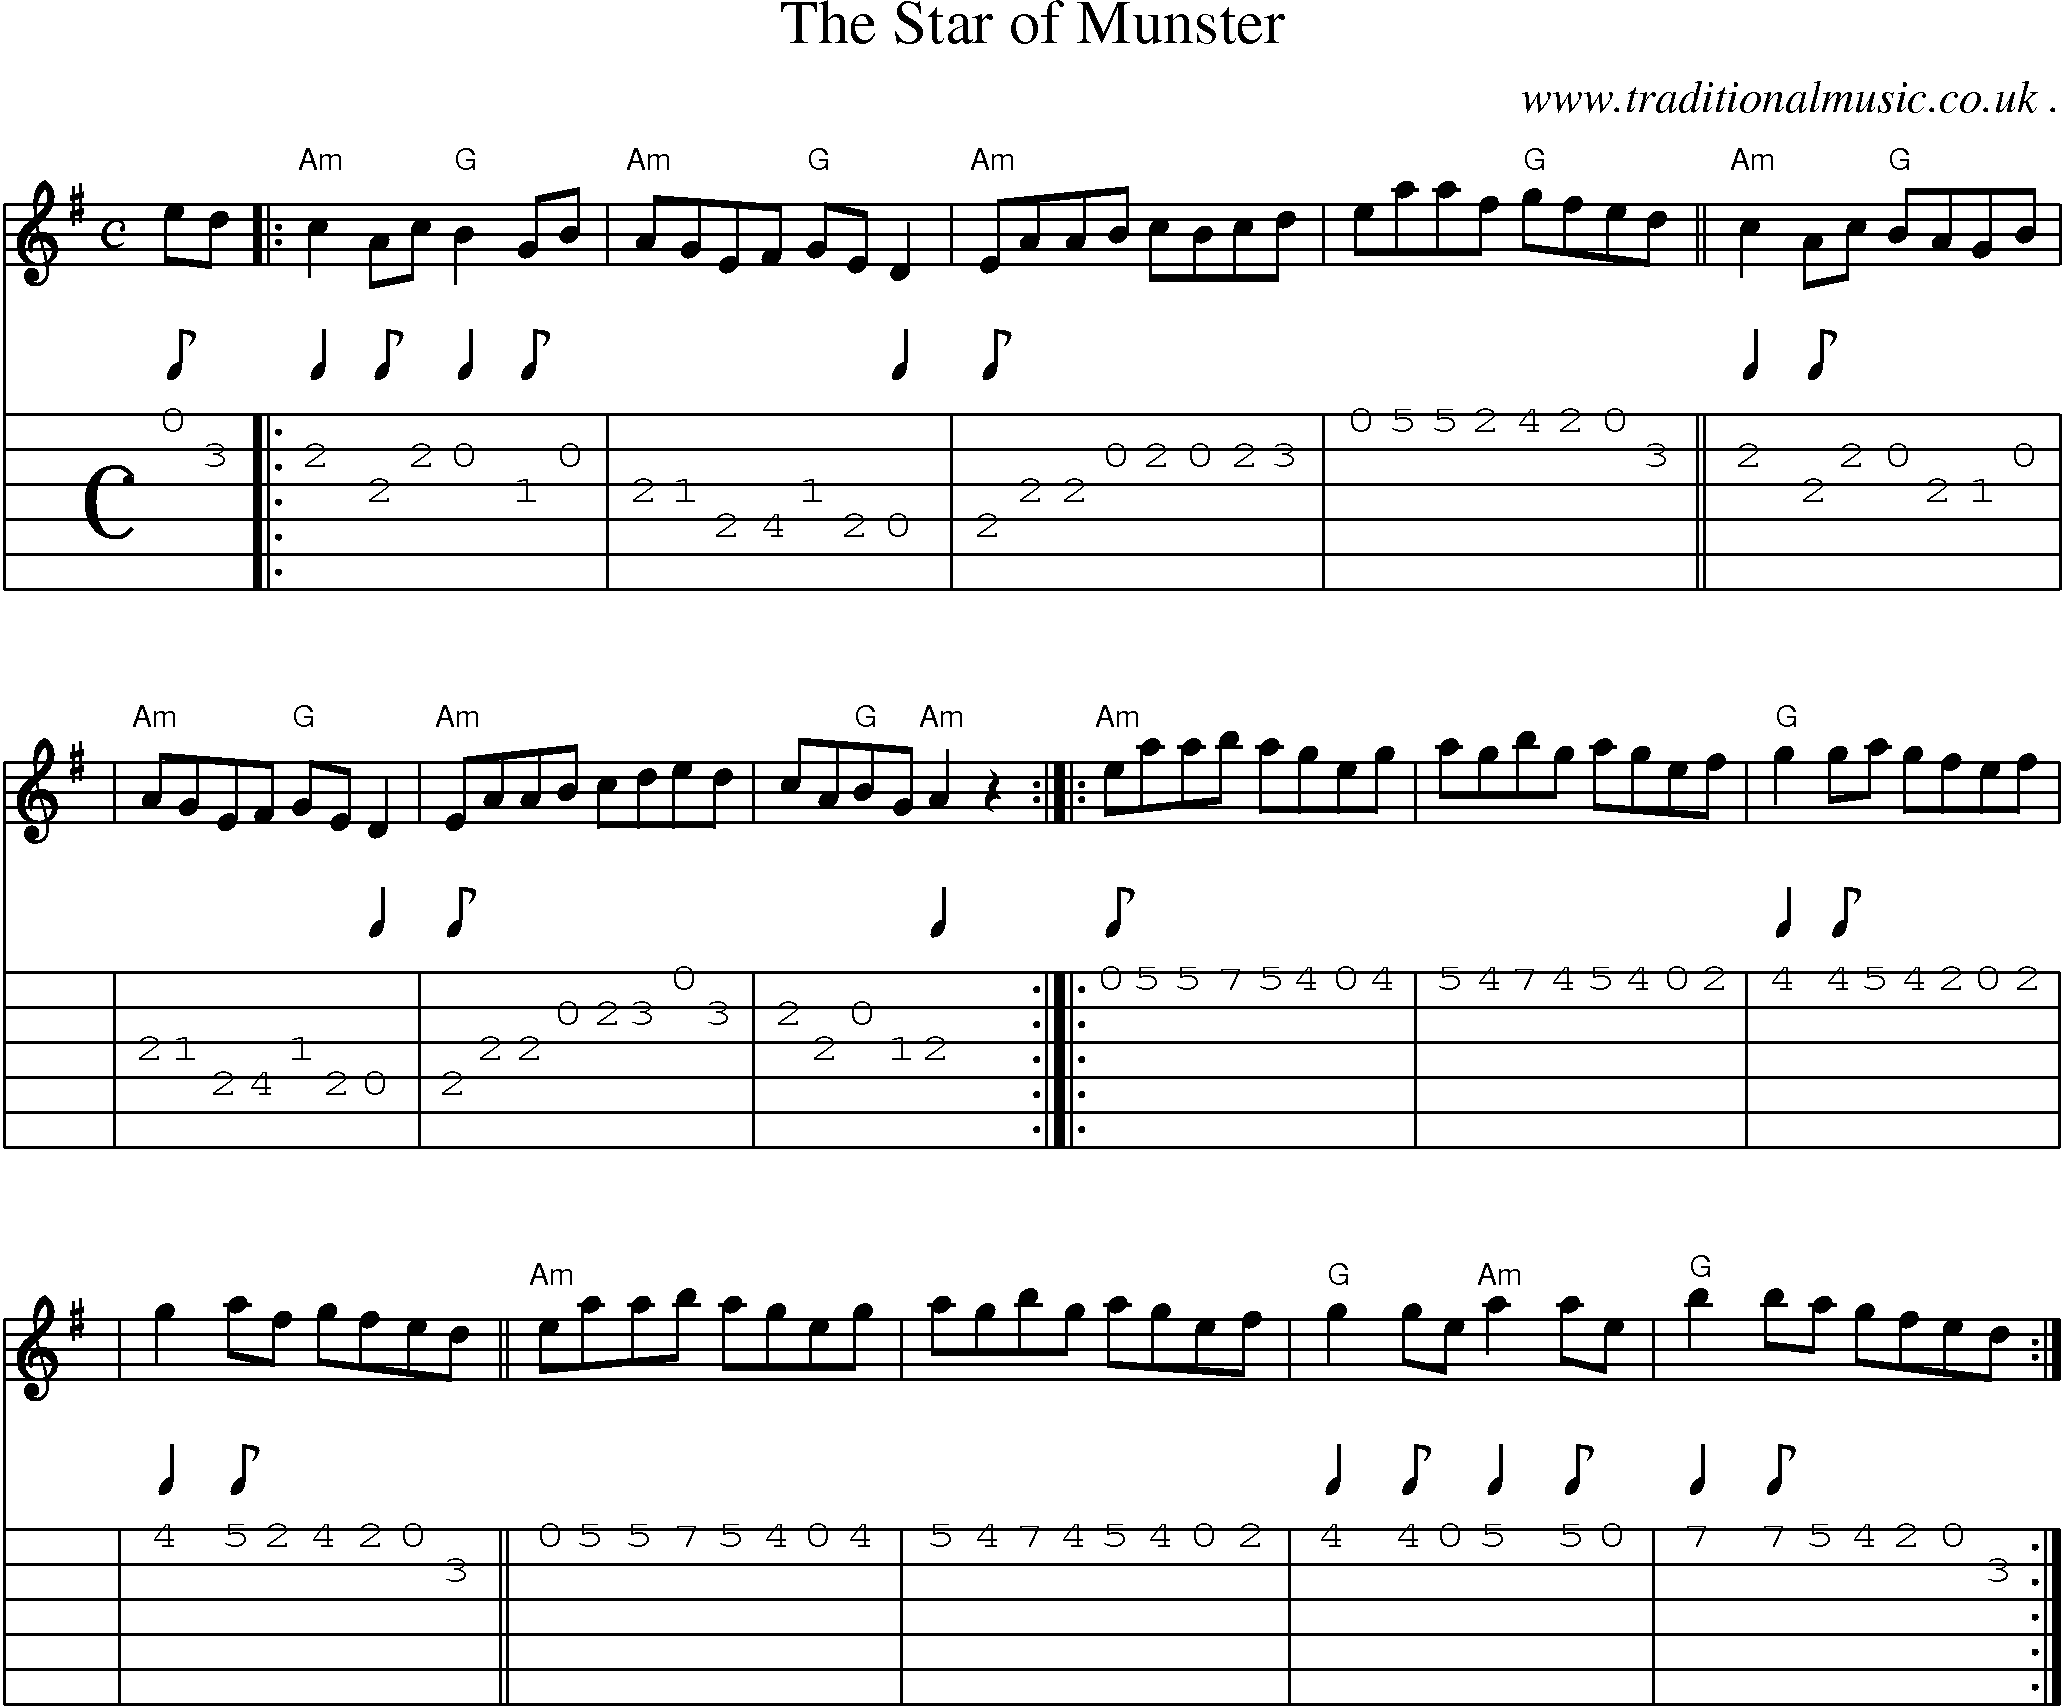 Sheet-music  score, Chords and Guitar Tabs for The Star Of Munster